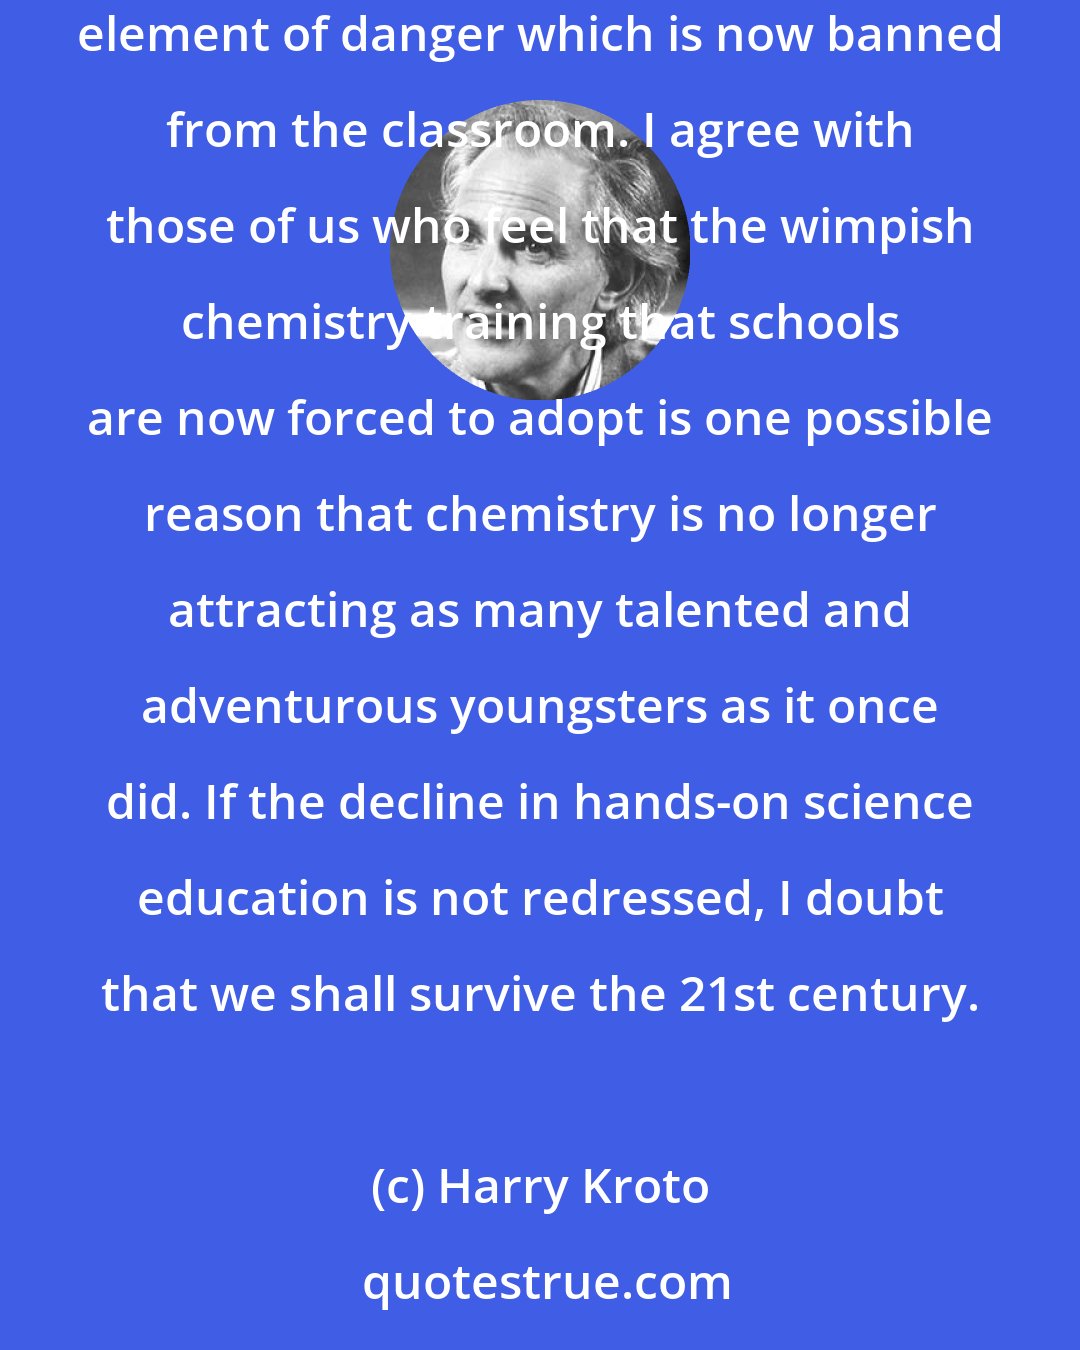 Harry Kroto: I, like almost all chemists I know, was also attracted by the smells and bangs that endowed chemistry with that slight but charismatic element of danger which is now banned from the classroom. I agree with those of us who feel that the wimpish chemistry training that schools are now forced to adopt is one possible reason that chemistry is no longer attracting as many talented and adventurous youngsters as it once did. If the decline in hands-on science education is not redressed, I doubt that we shall survive the 21st century.